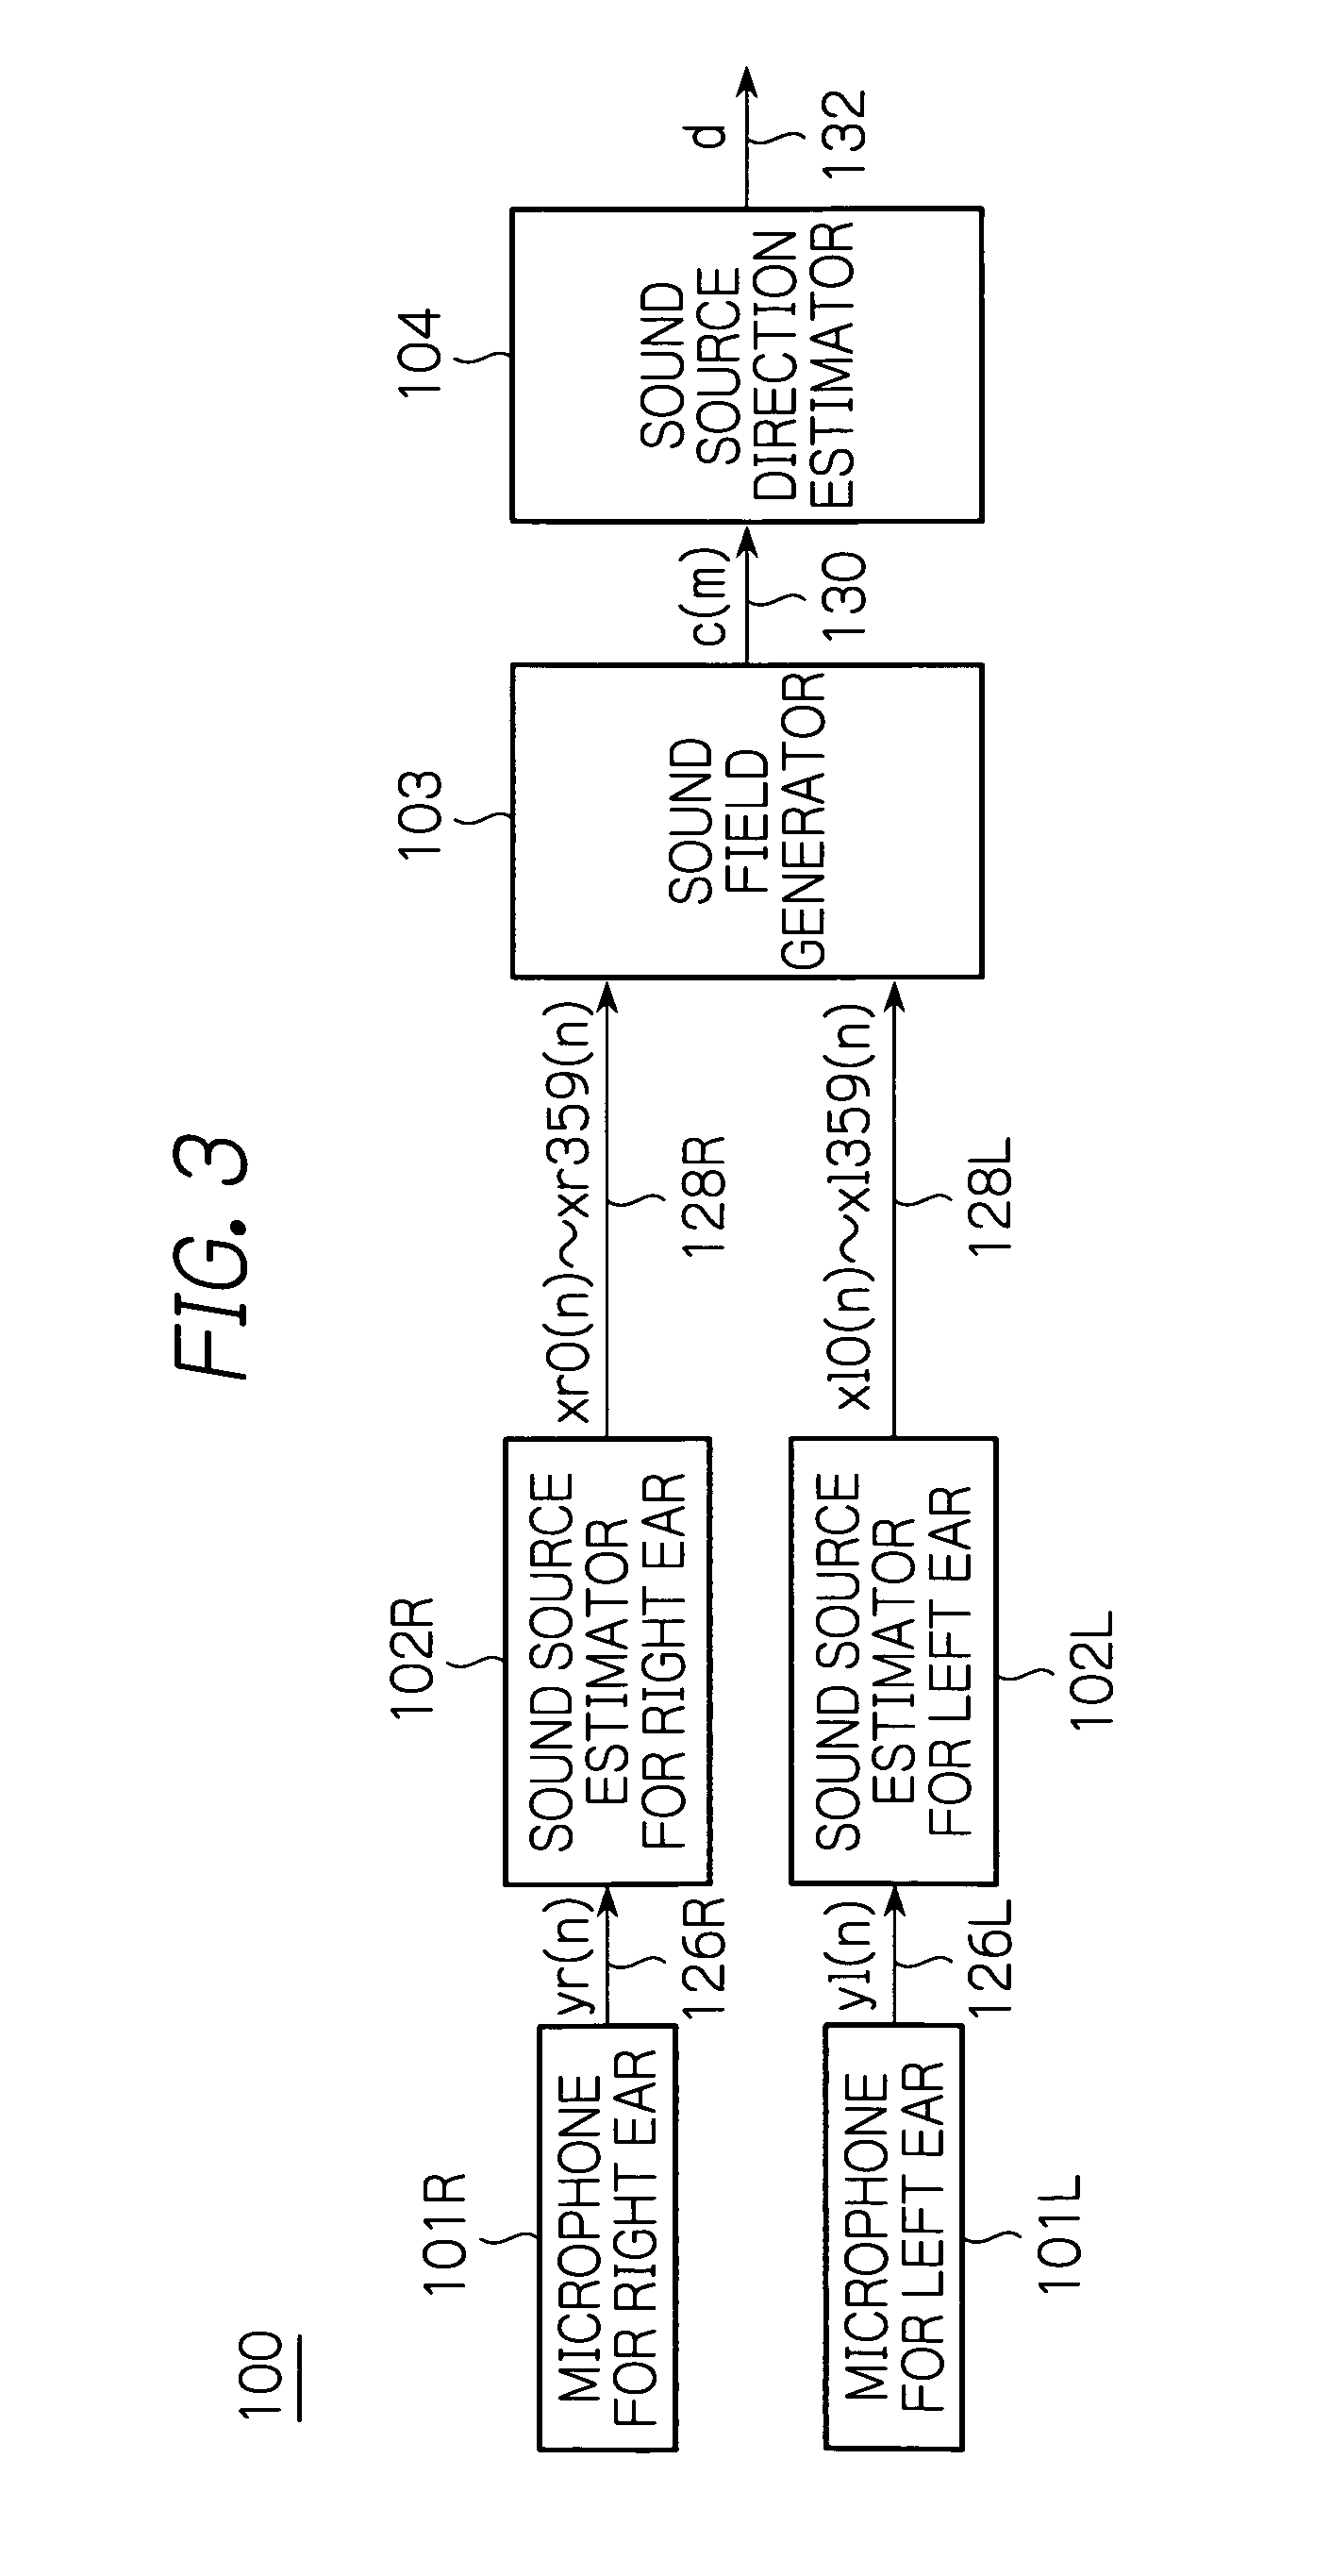 Apparatus for estimating sound source direction from correlation between spatial transfer functions of sound signals on separate channels